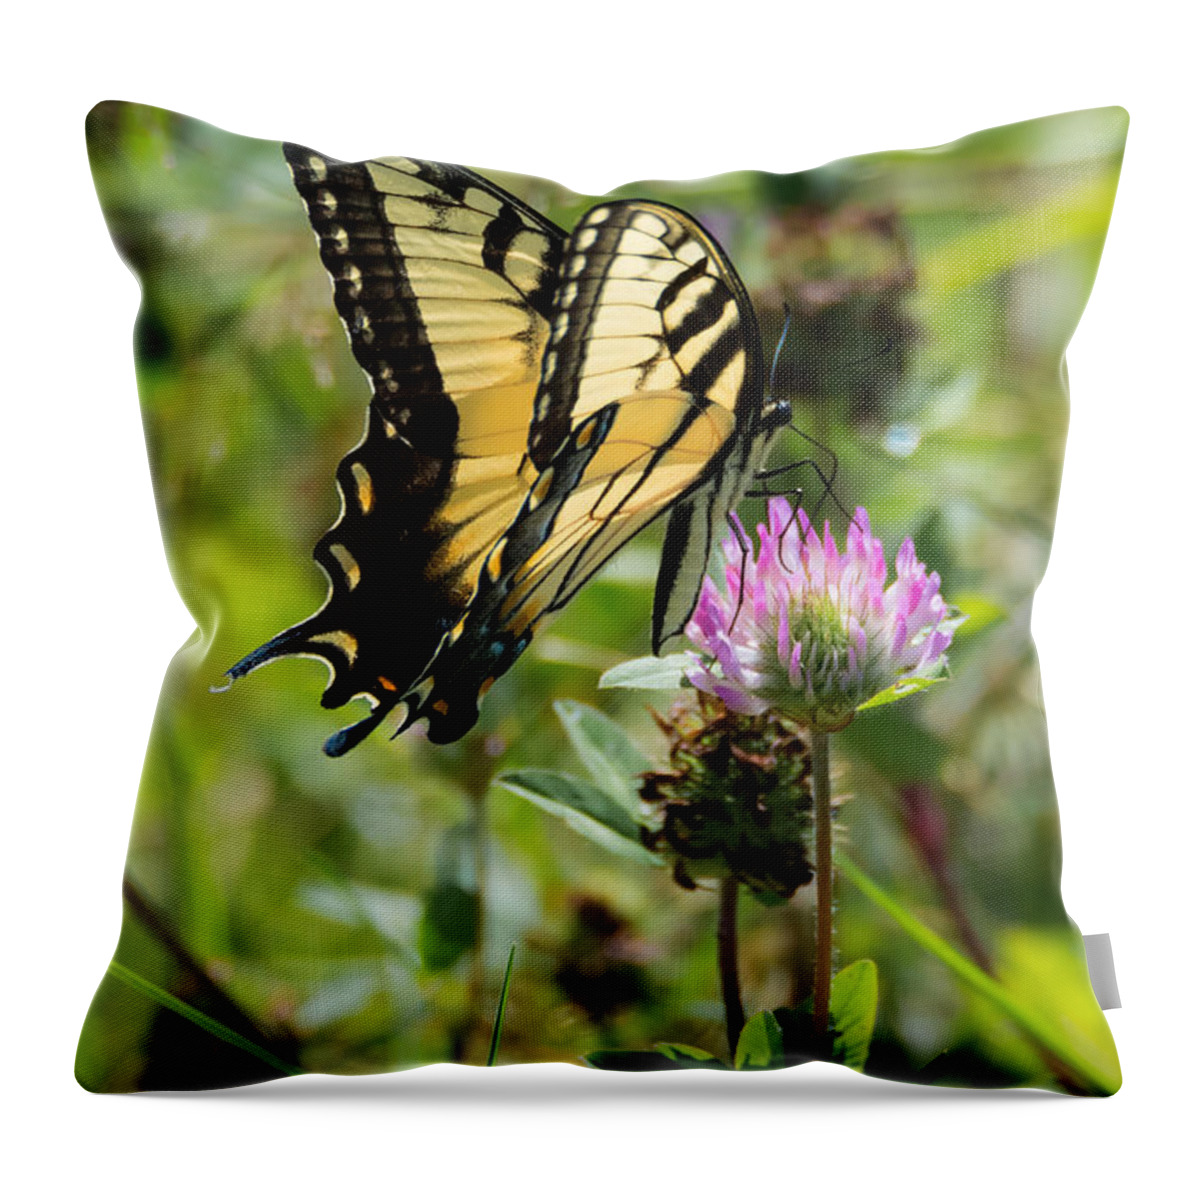 Butterfly Throw Pillow featuring the photograph Tiger Swallowtail Butterfly by Holden The Moment